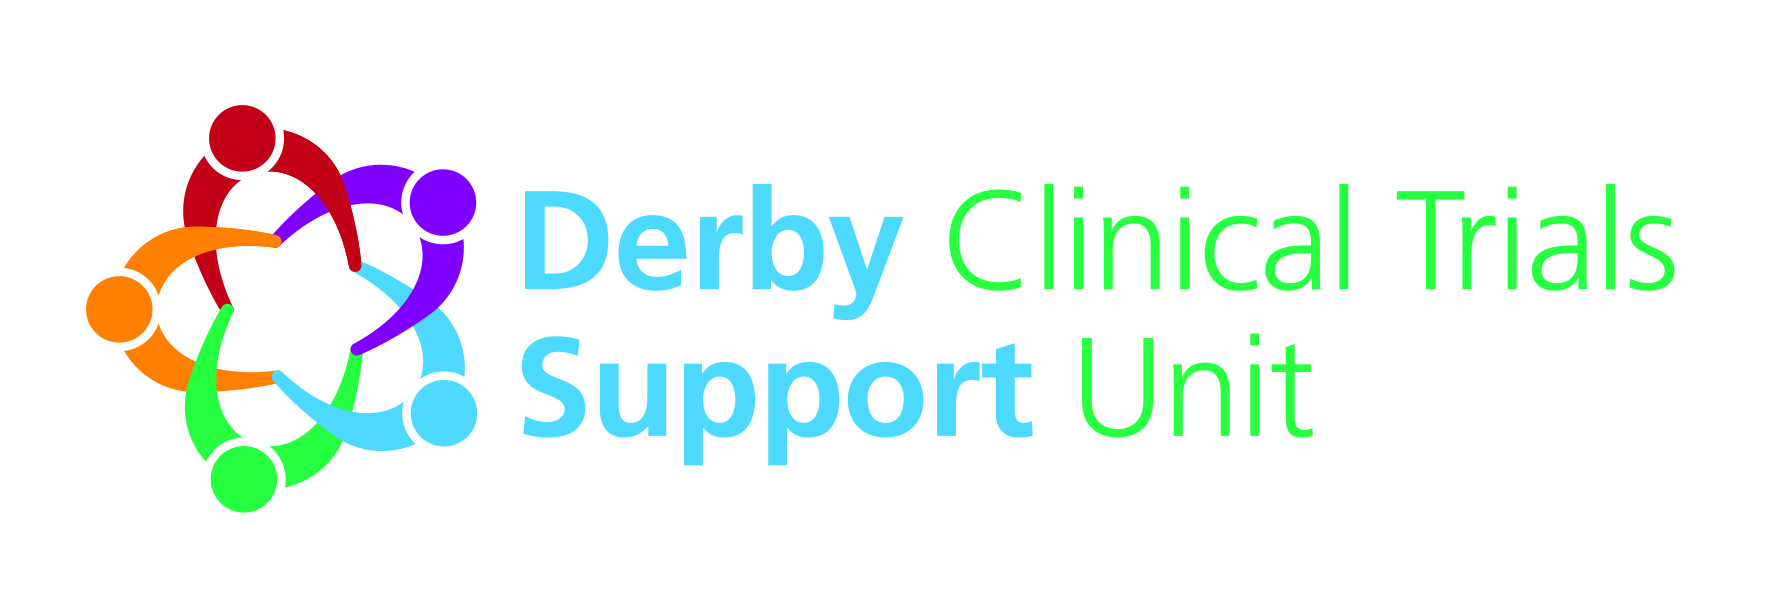 Derby Clinical Trials Support Unit